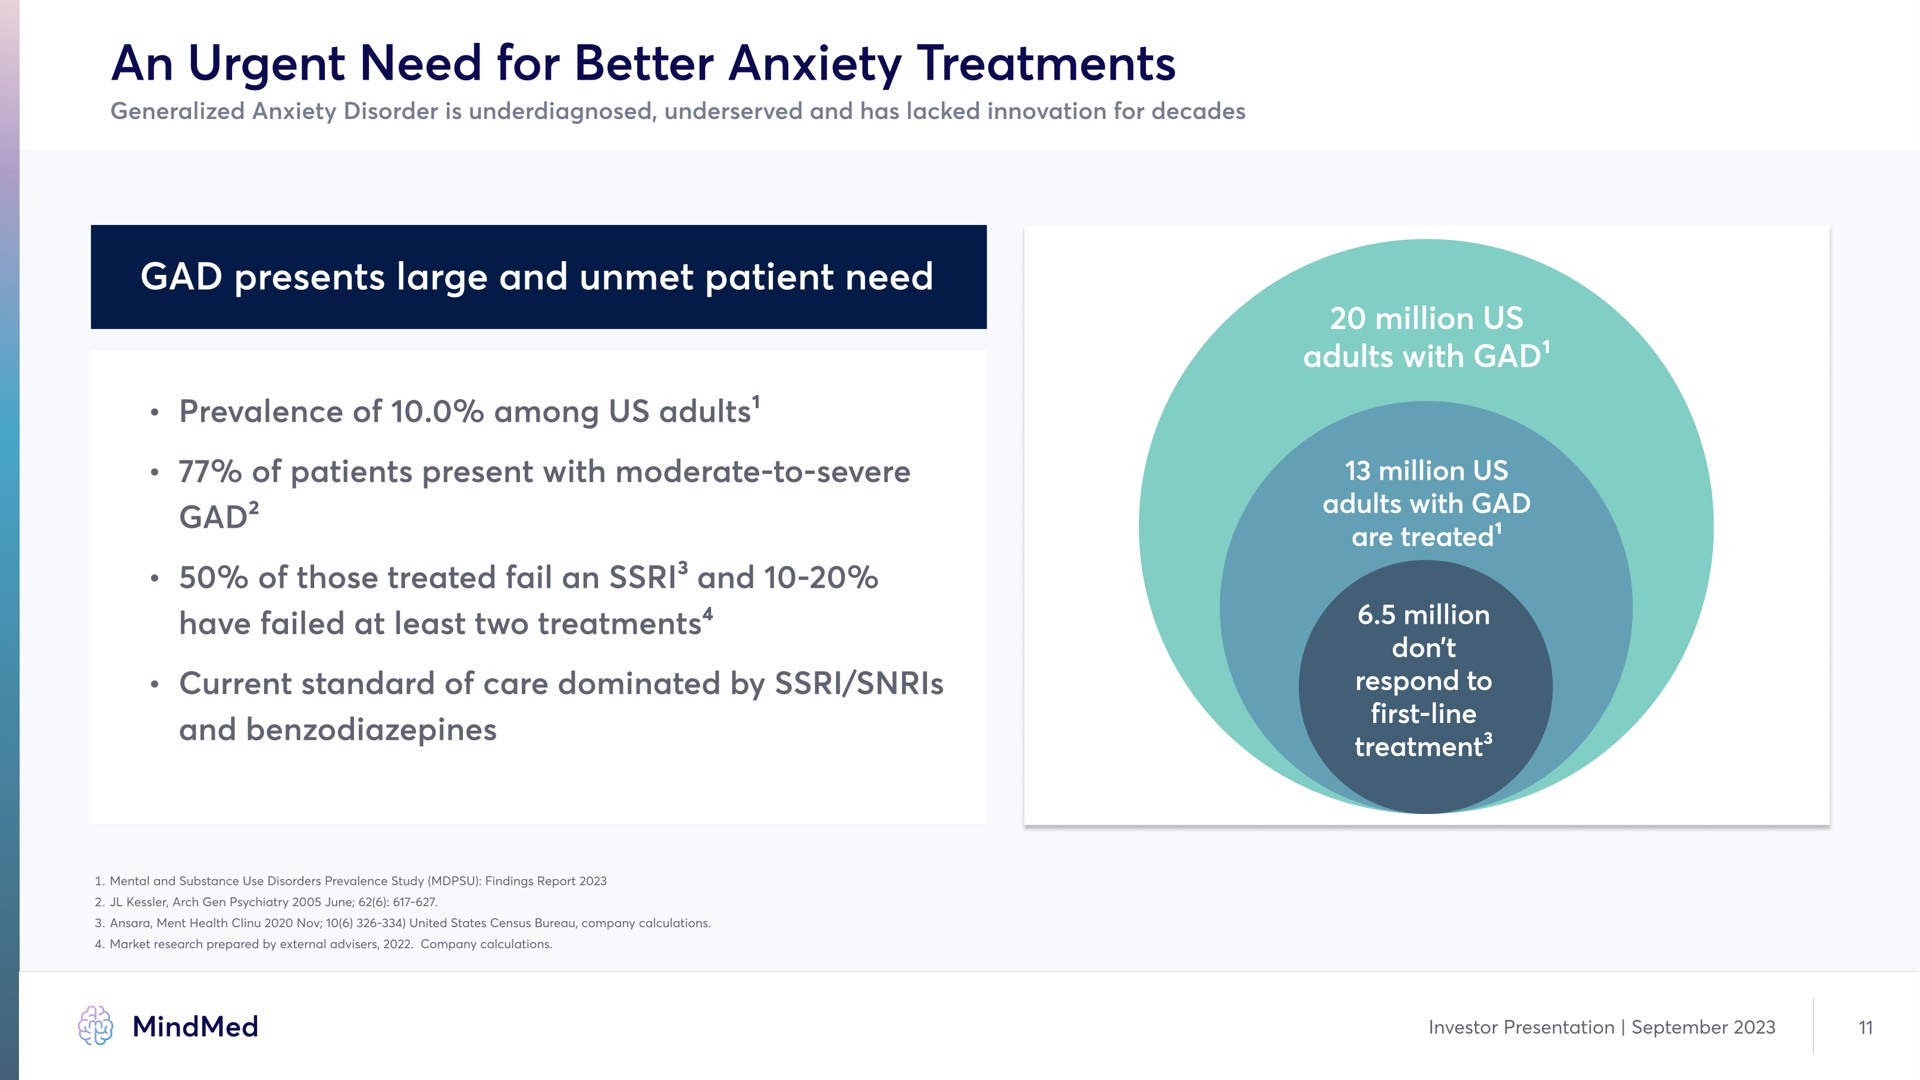 an urgent need for better anxiety treatments gad presents large and unmet patient need prevalence of among us adults of patients present with moderate to severe gad of those treated fail an and have failed at least two treatments current standard of care dominated by and million us adults with gad irene | MindMed